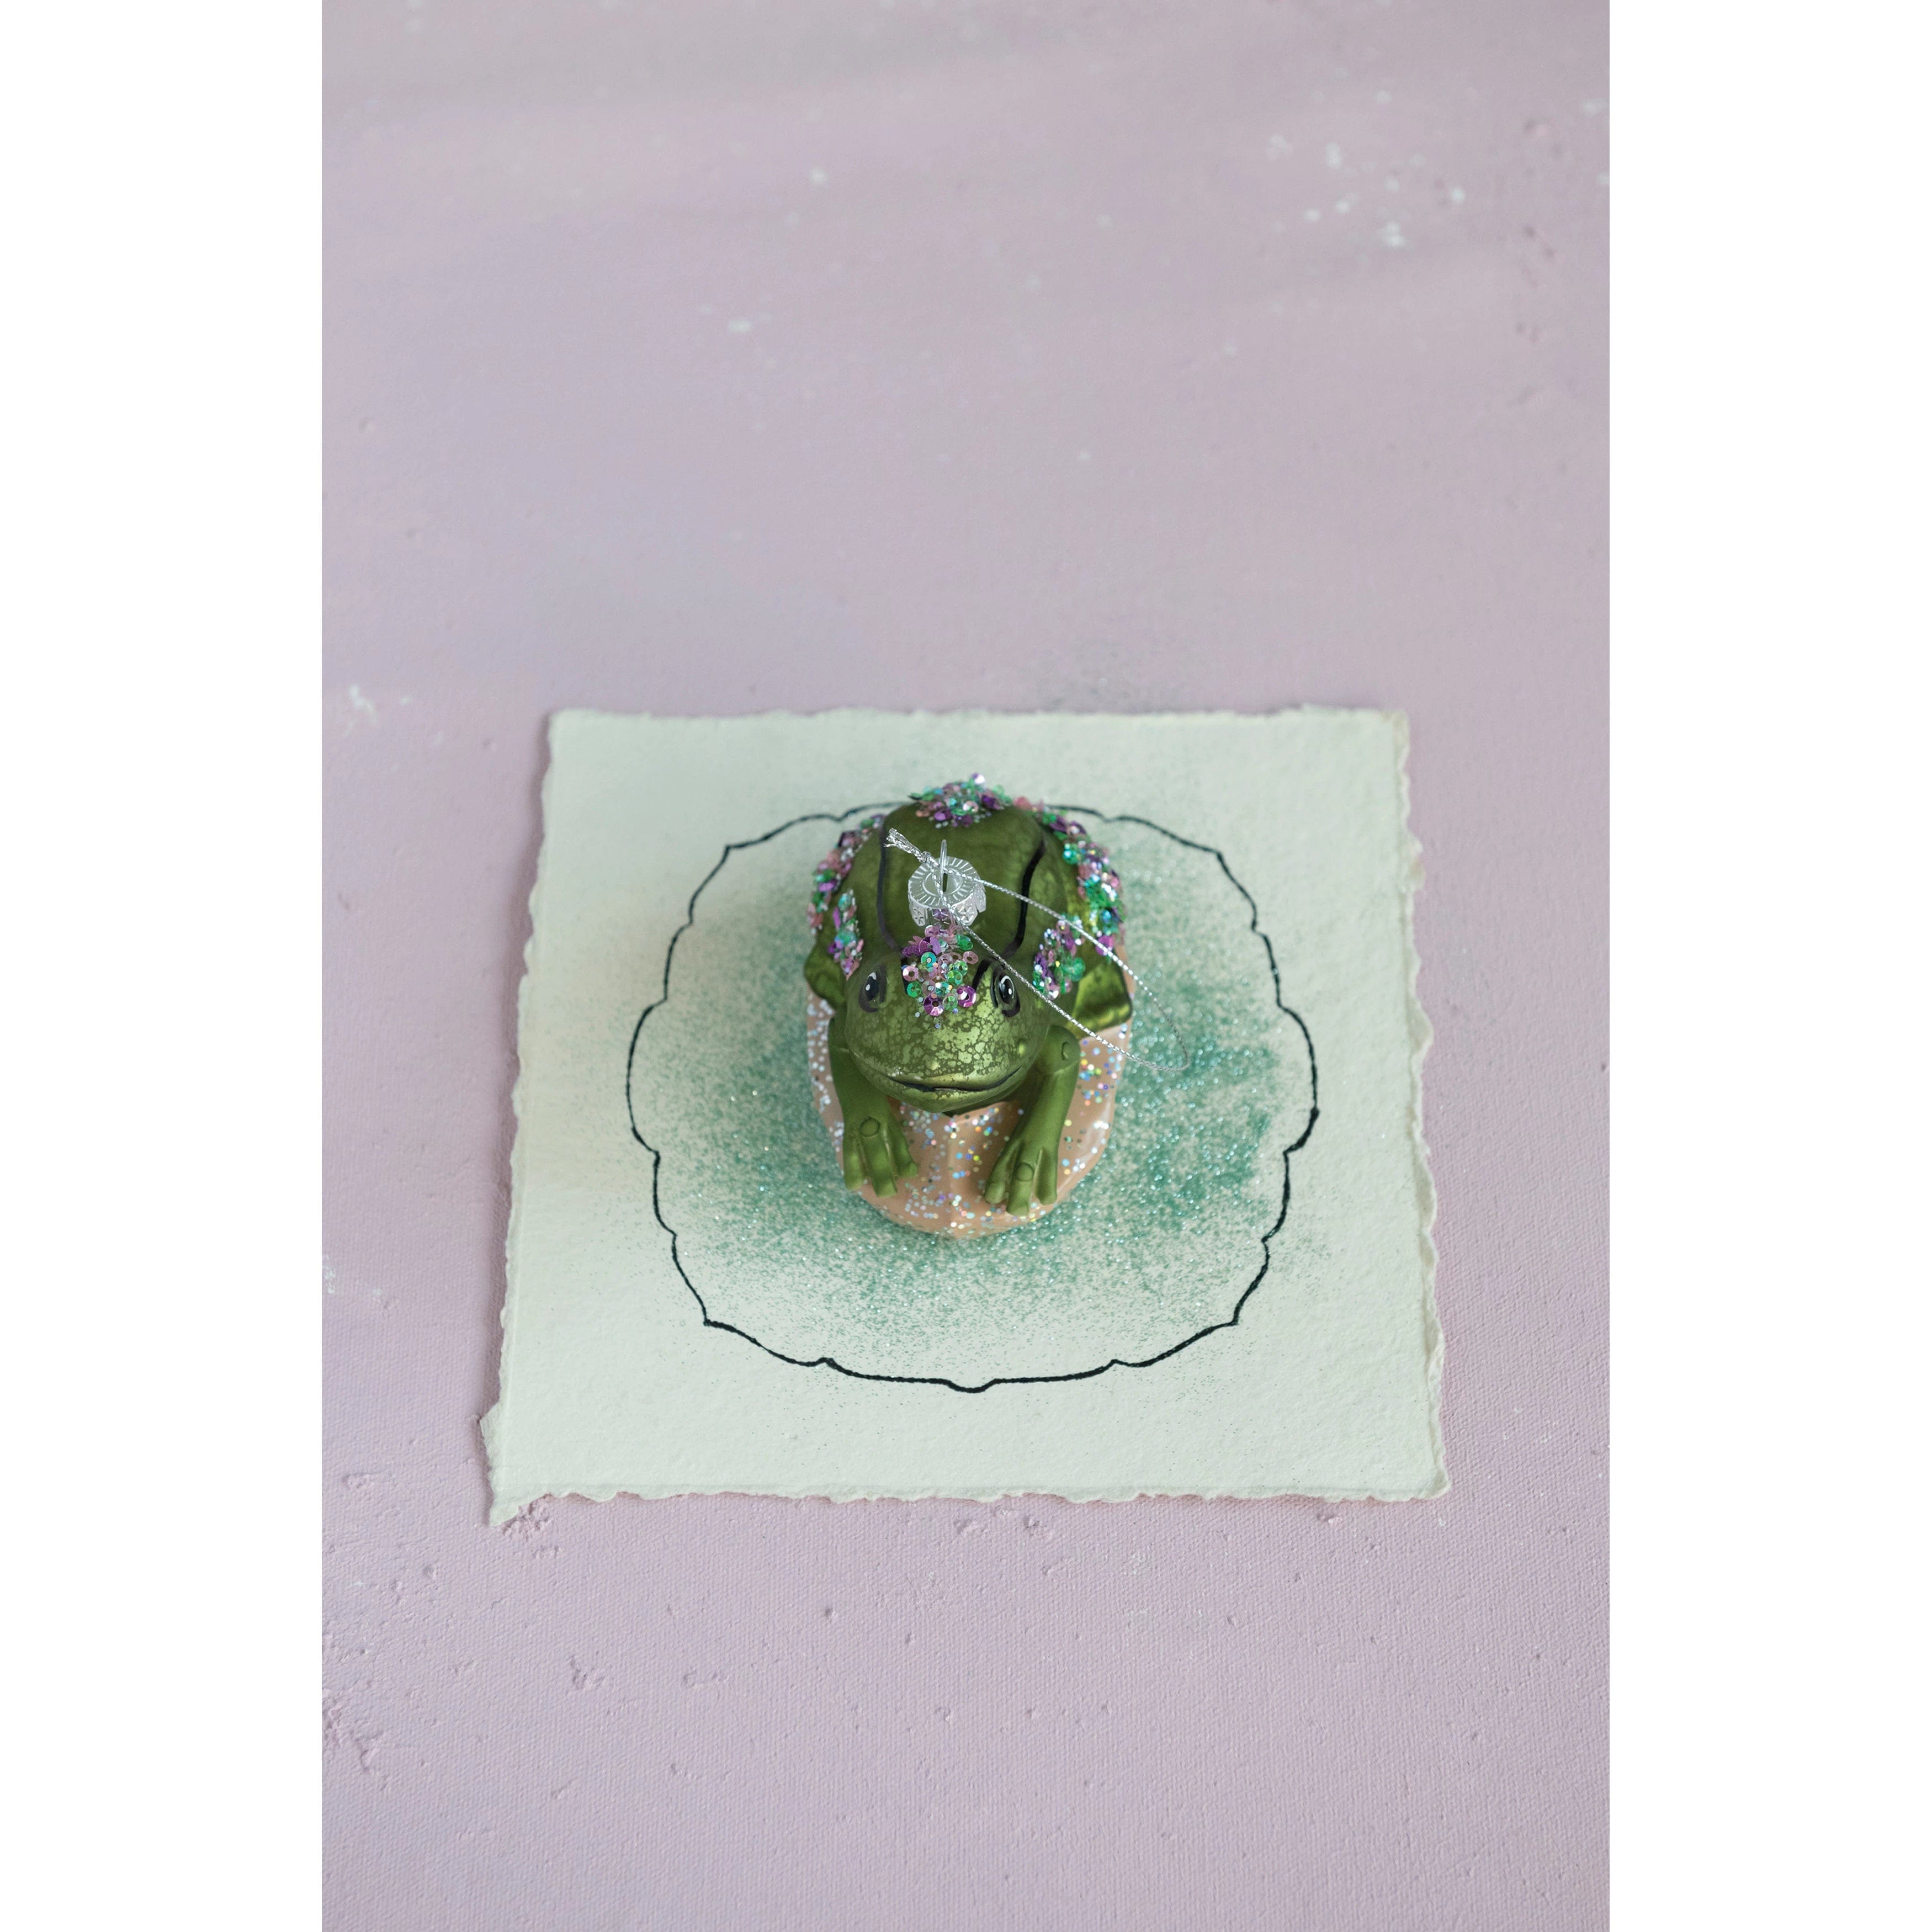 CCO - Creative Co-op Creative Co-op Hand-Painted Glass Frog Ornament - Little Miss Muffin Children & Home